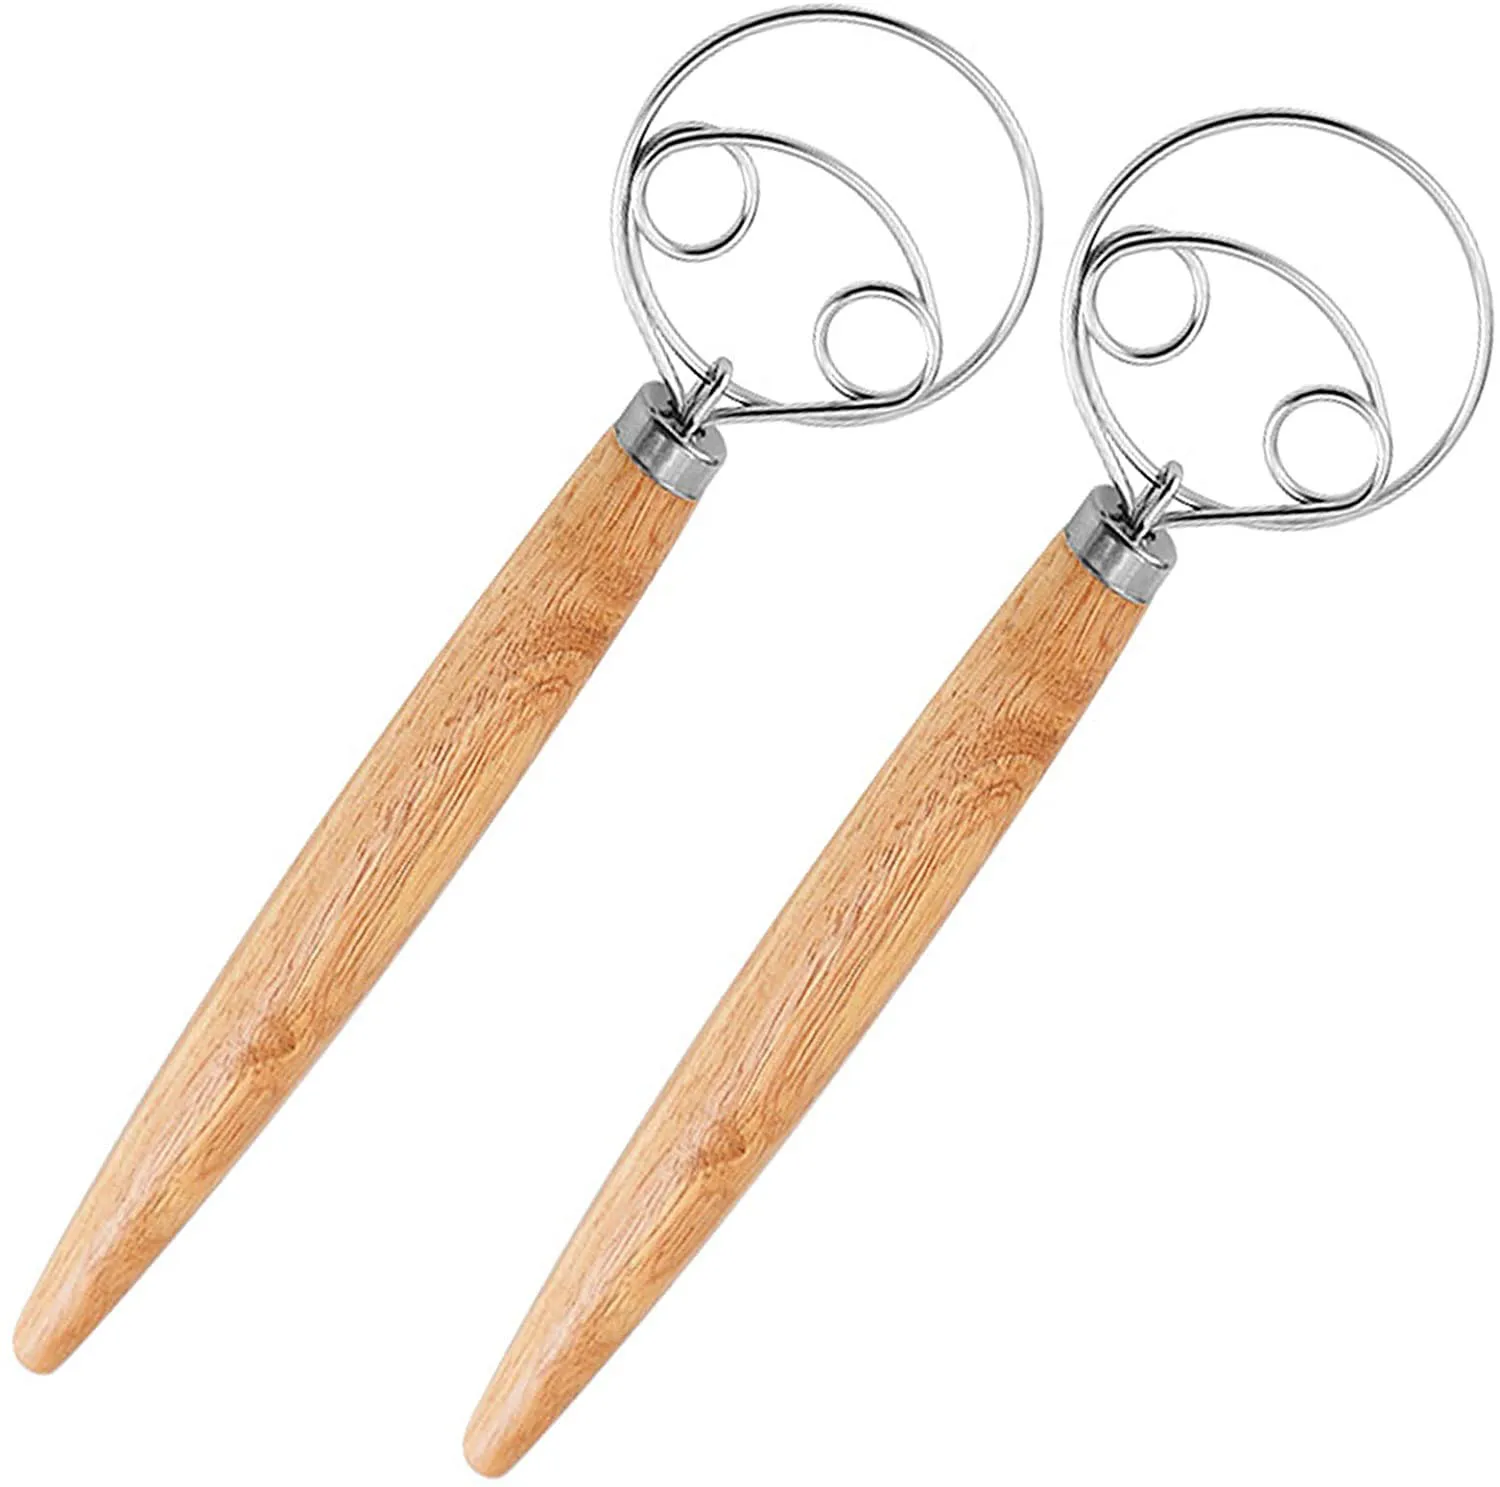 

Private Label Long Wooden Handle and Stainless Steel Bread Danish Whisk Baking Tool Dough Whisk for Mixing Dough